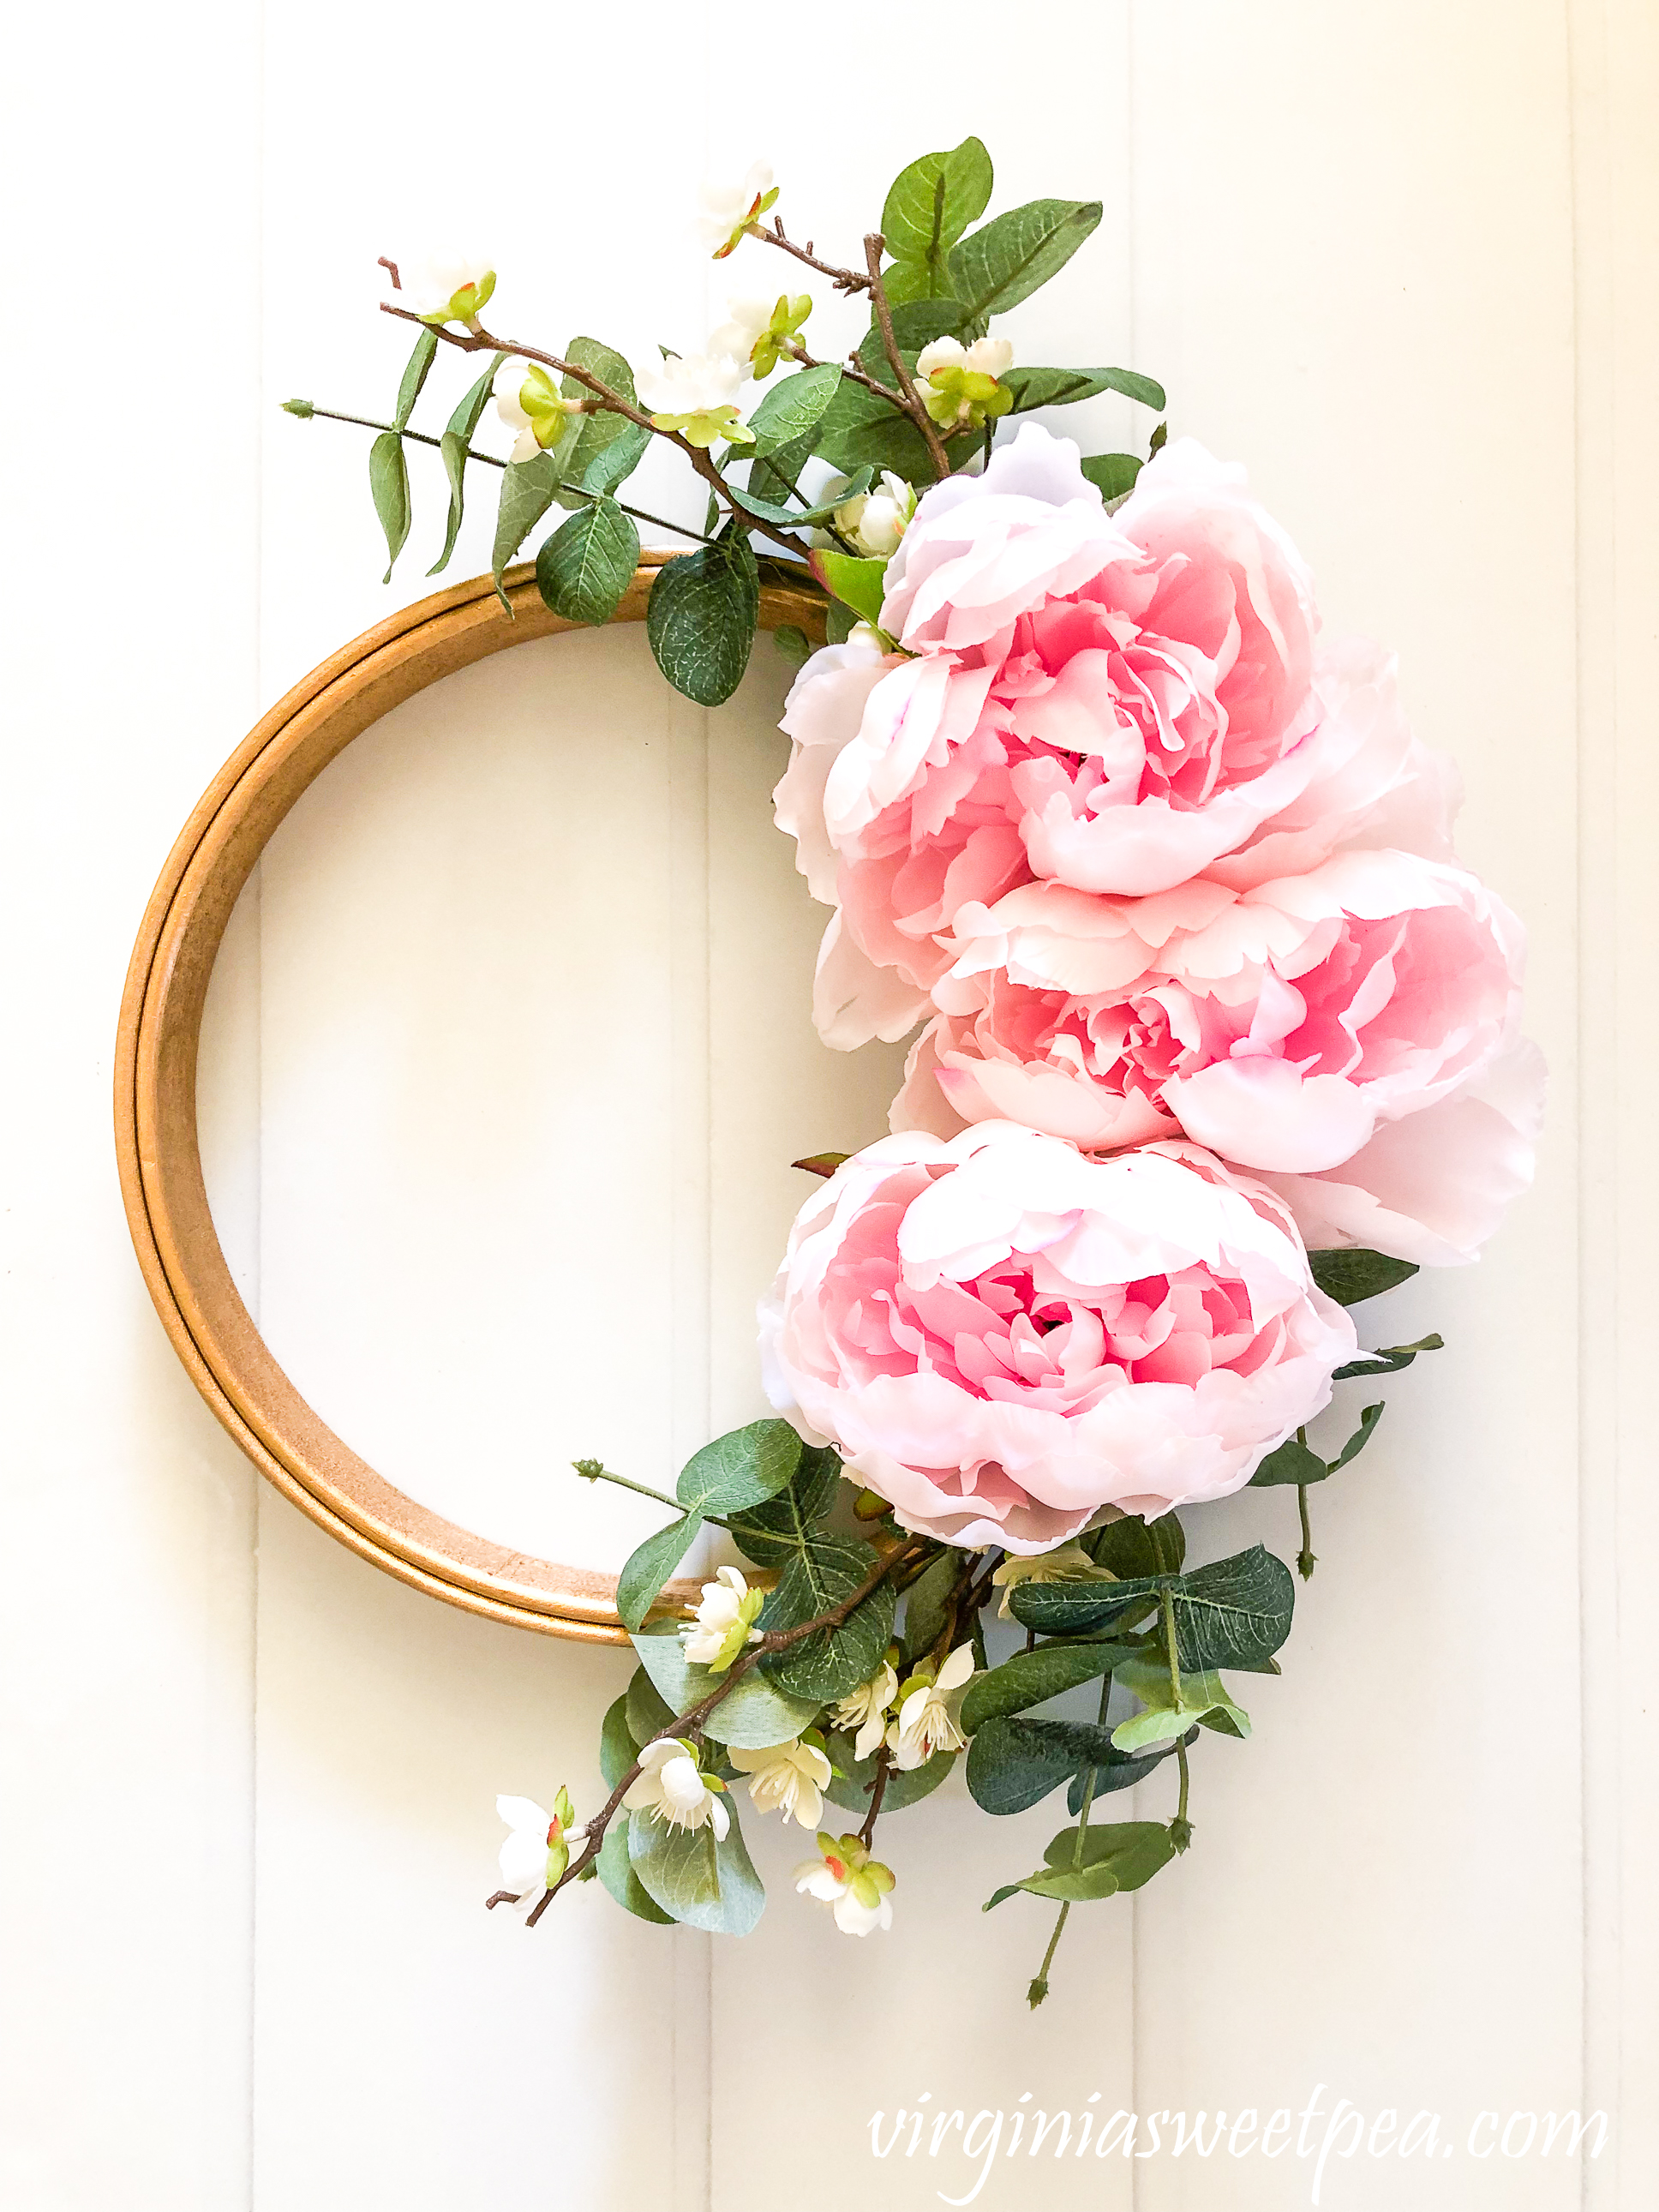 DIY Embroidery Hoop Wreath - Follow this step-by-step tutorial to learn to make this wreath for your home. #wreath #springwreath #wreathtutorial #springcraft #springmantel